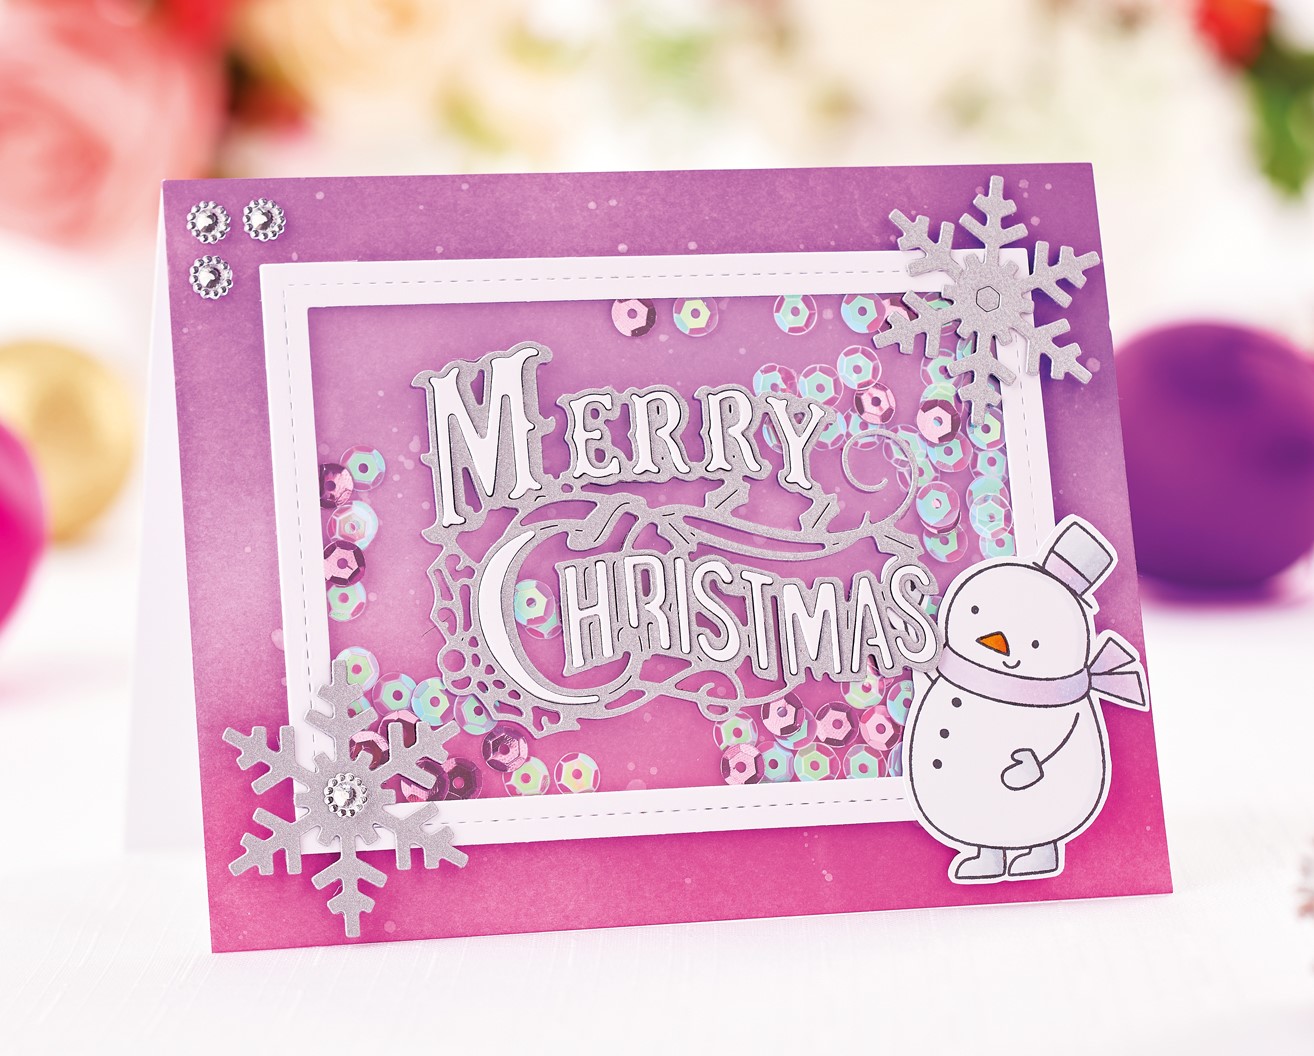 Diecut Christmas Cards PaperCrafter project